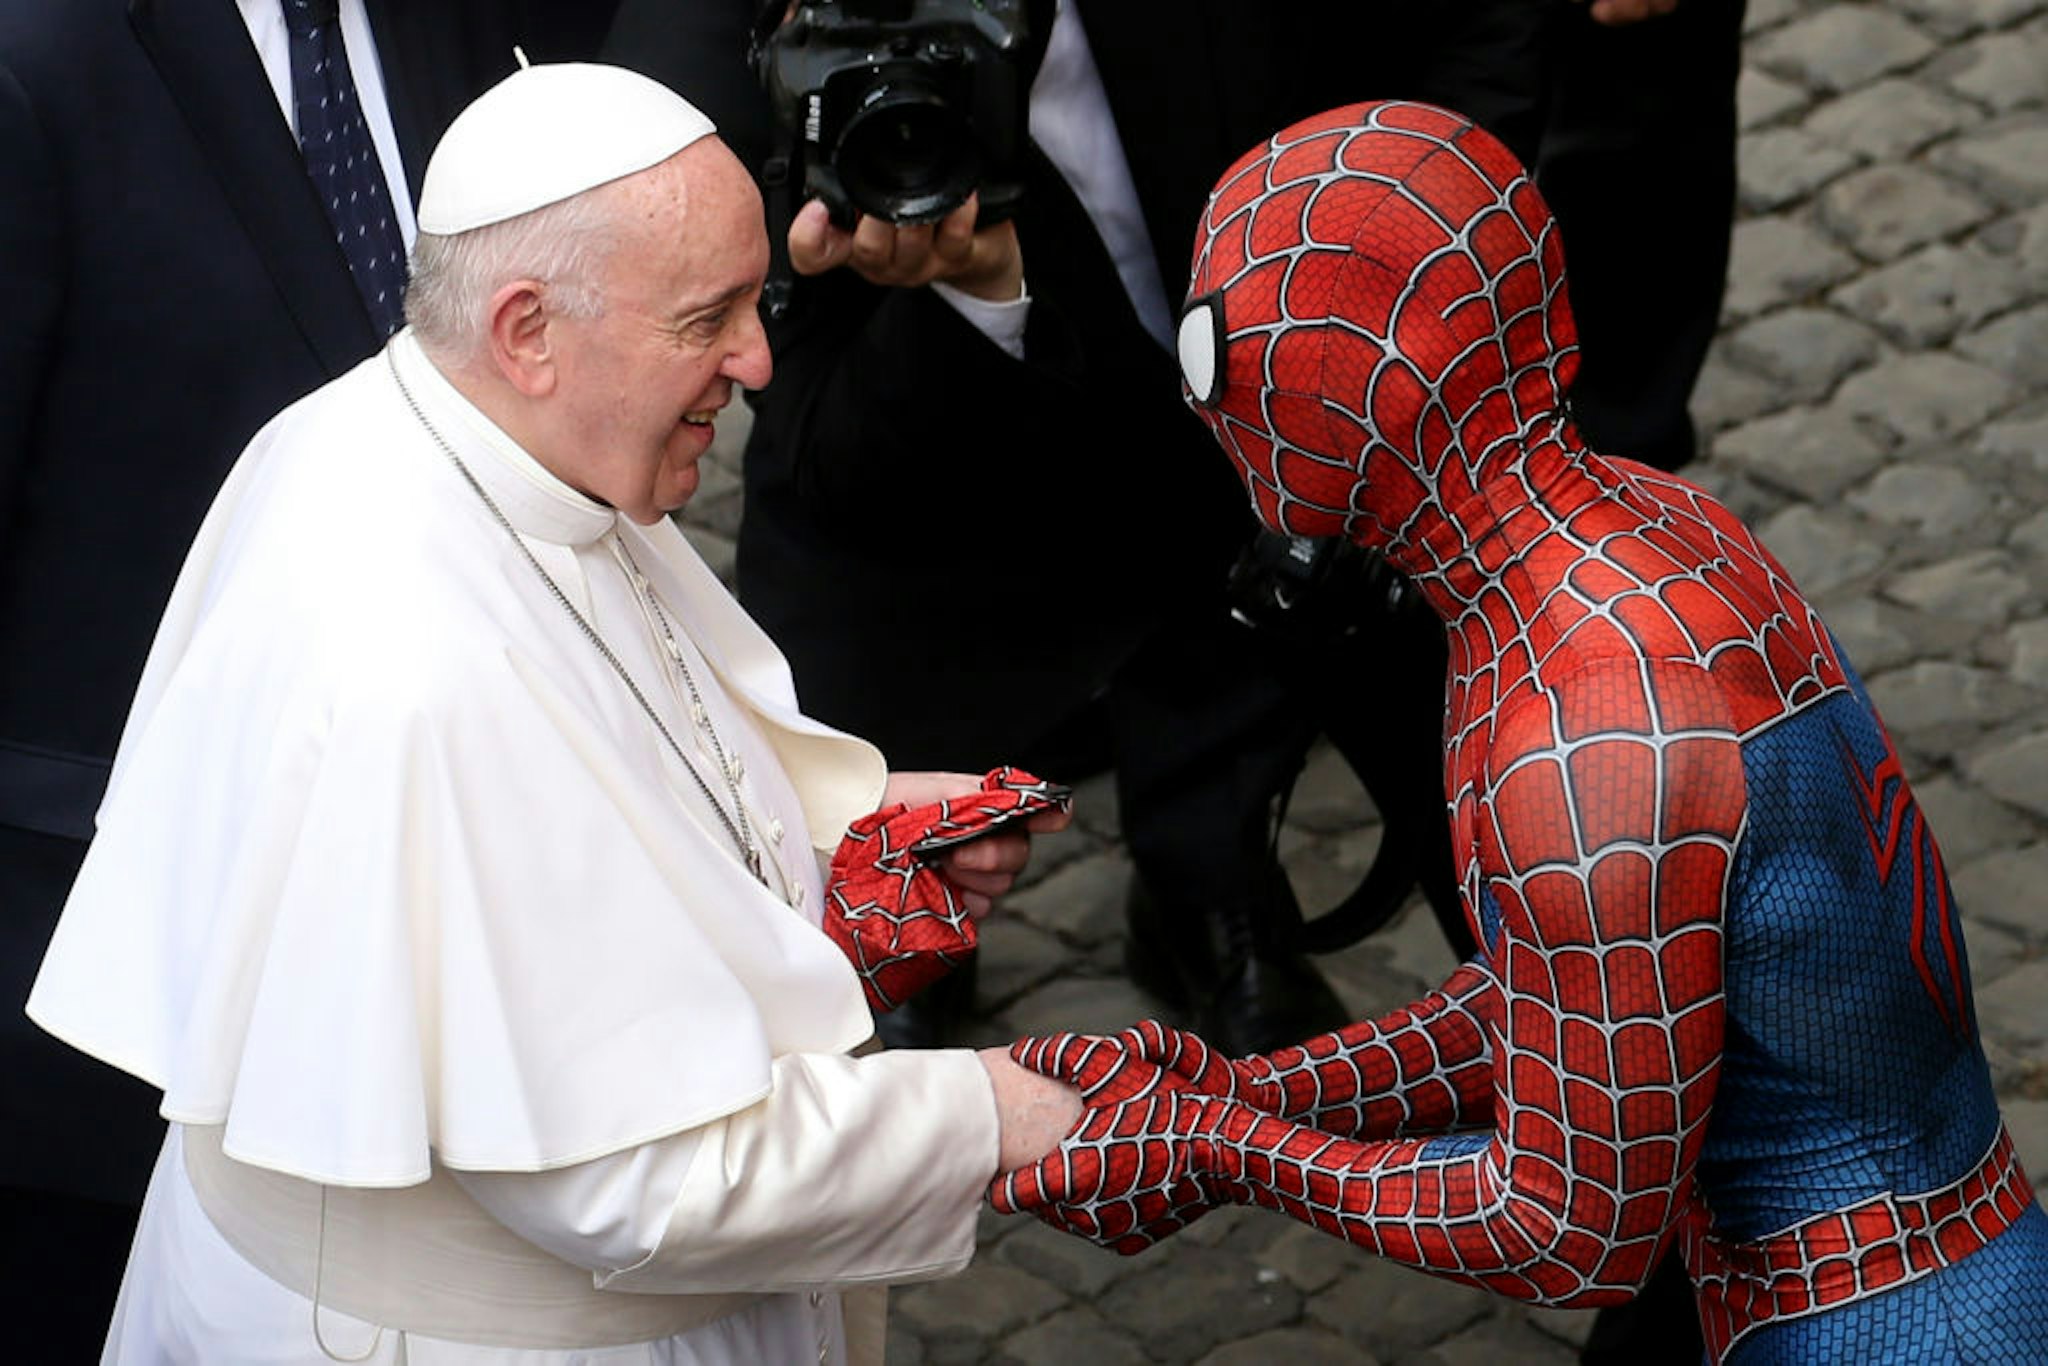 VATICAN CITY, VATICAN - JUNE 23: Pope Francis greets Mattia Villardita, a young man in the Spider-Man costume who makes children smile in the pediatric wards of hospitals, during his general audience at the courtyard of San Damaso on June 23, 2021 in Vatican City, Vatican. (Photo by